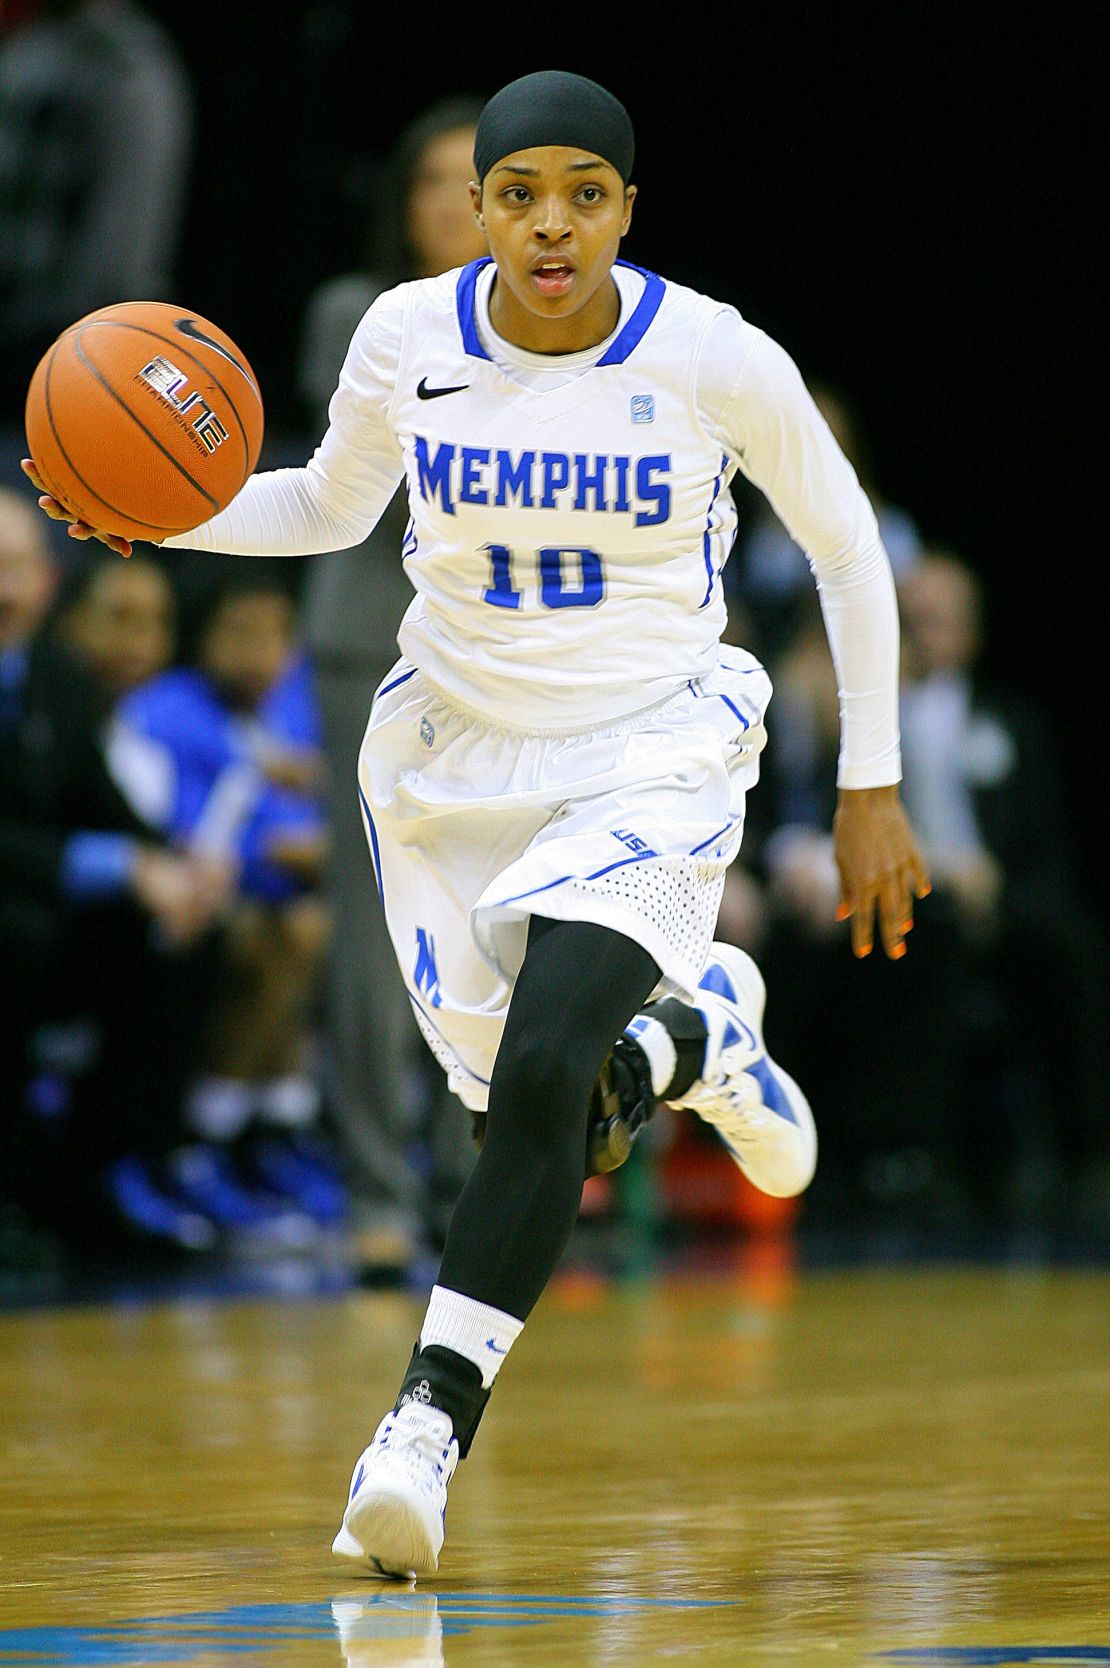 Bilqis Abdul-Qaadir, Memphis Lady Tigers guard at the time, dribbling the ball up the court against the Tulane Green Wave.